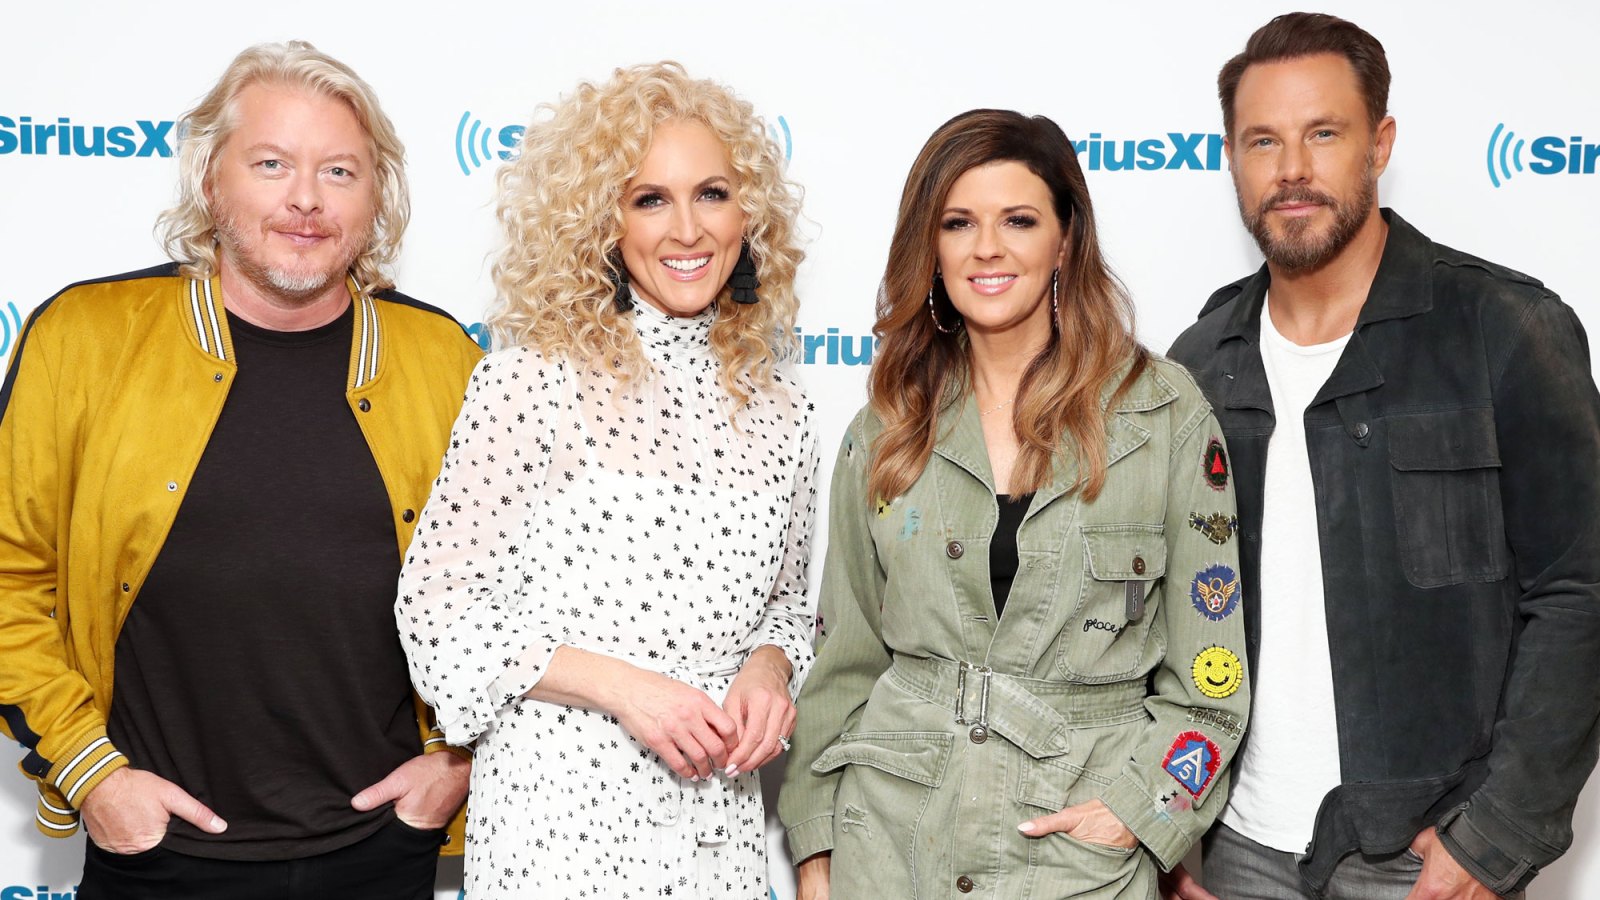 Little Big Town Everything You Need to Know About the CMT Awards 2019 Hosts, Performers, Nominees and More